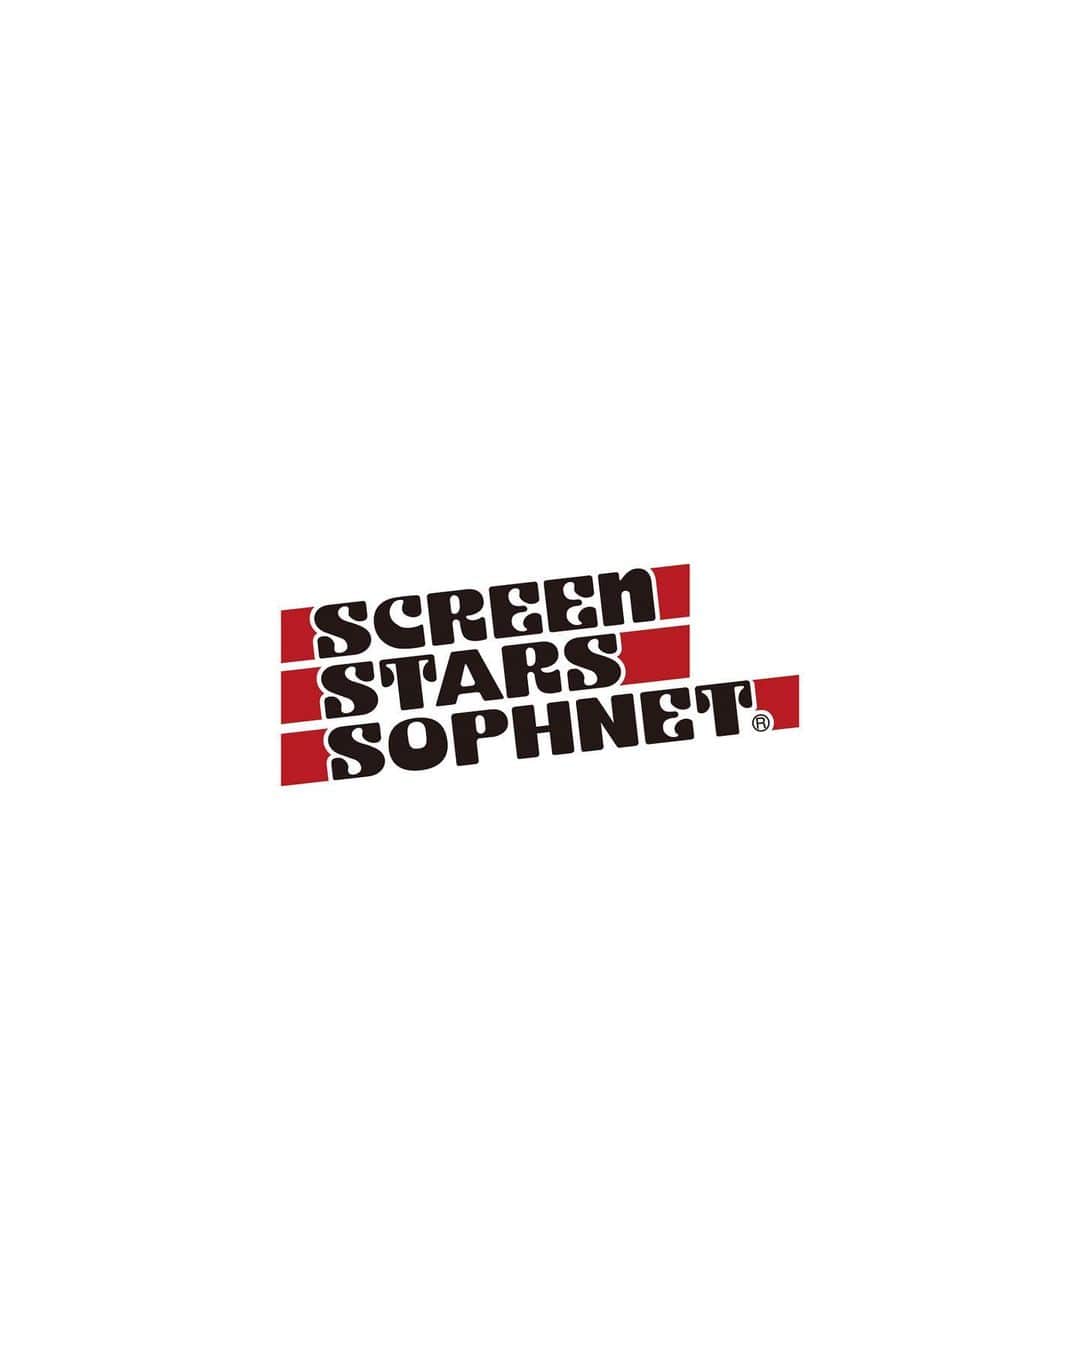 ソフのインスタグラム：「"SOPHNET. × SCREENSTARS" RELEASE on DECEMBER 8 (FRI)  SOPHNET.より、SCREENSTARSとのコラボレーションによるスウェットコレクションを発売します。  ゆとりのあるシルエットをベースにした裏起毛仕上げのフーディとクルーネックは全3色展開。  胸元にはスコーピオンロゴの刺繍を、ネック部にはオリジナルのタグを配したミニマルな仕上がりに。  12/8(金)よりSOPH.shopにて、同日正午よりSOPH. ONLINE STOREにて発売。  *入荷状況、販売方法は店舗によって異なりますので、詳細は各店舗までお問い合わせください。 *SOPH.shopでの通販につきましては、12/9(土)からとなります。  SOPHNET. is pleased to announce the release of a new sweatshirt collection in collaboration with SCREENSTARS.  Based on a roomy silhouette, the hoodie and crew neck with a back-fabric finish are available in a total of three colors.  This item has a minimalist design with the Scorpion logo embroidered on the chest and an original tag at the neck.  Available at SOPH.shops from 12/8(Fri), and SOPH. ONLINE STORE from 12:00pm(JST) on the same day.  *Please contact each store for details as the availability and sales method differ depending on the store. *As for the mail order at SOPH.shops, it starts from 12/9(Sat). ⠀ www.soph.net . #SOPHNET #SCREENSTARS #SOPHNETxSCREENSTARS @screenstars_usa」